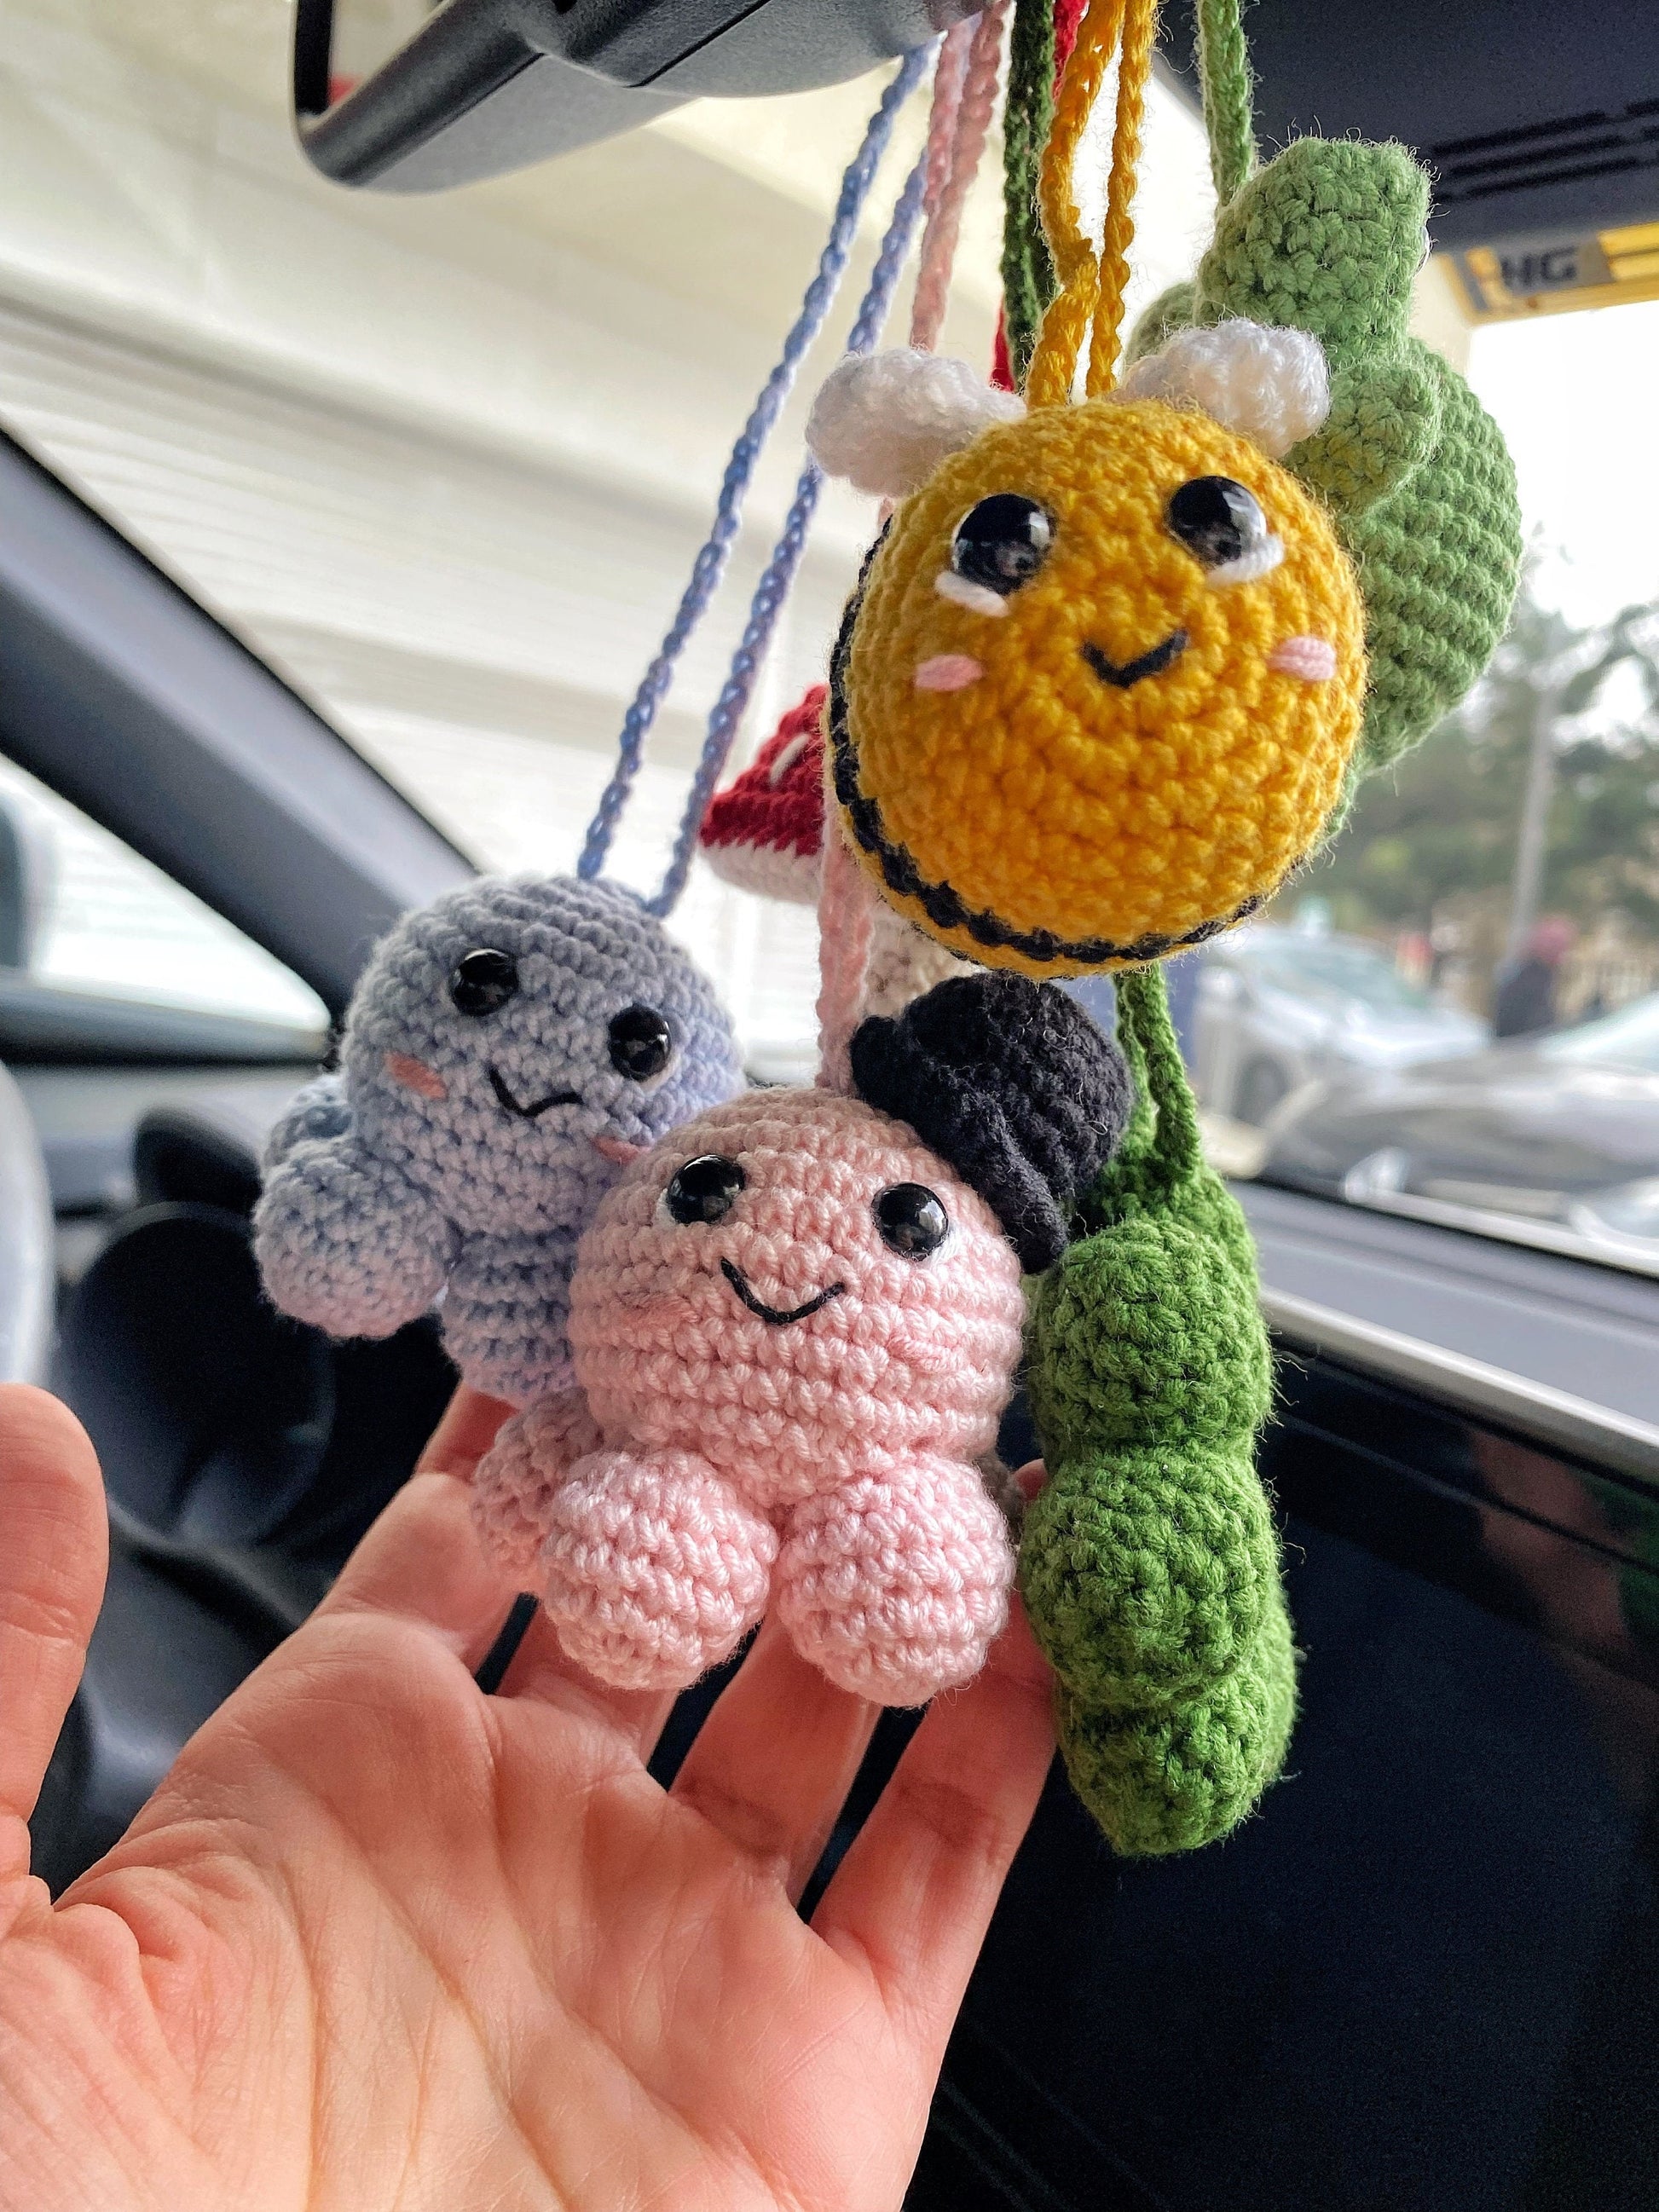 Cute crochet charms are the craft trend you need to try